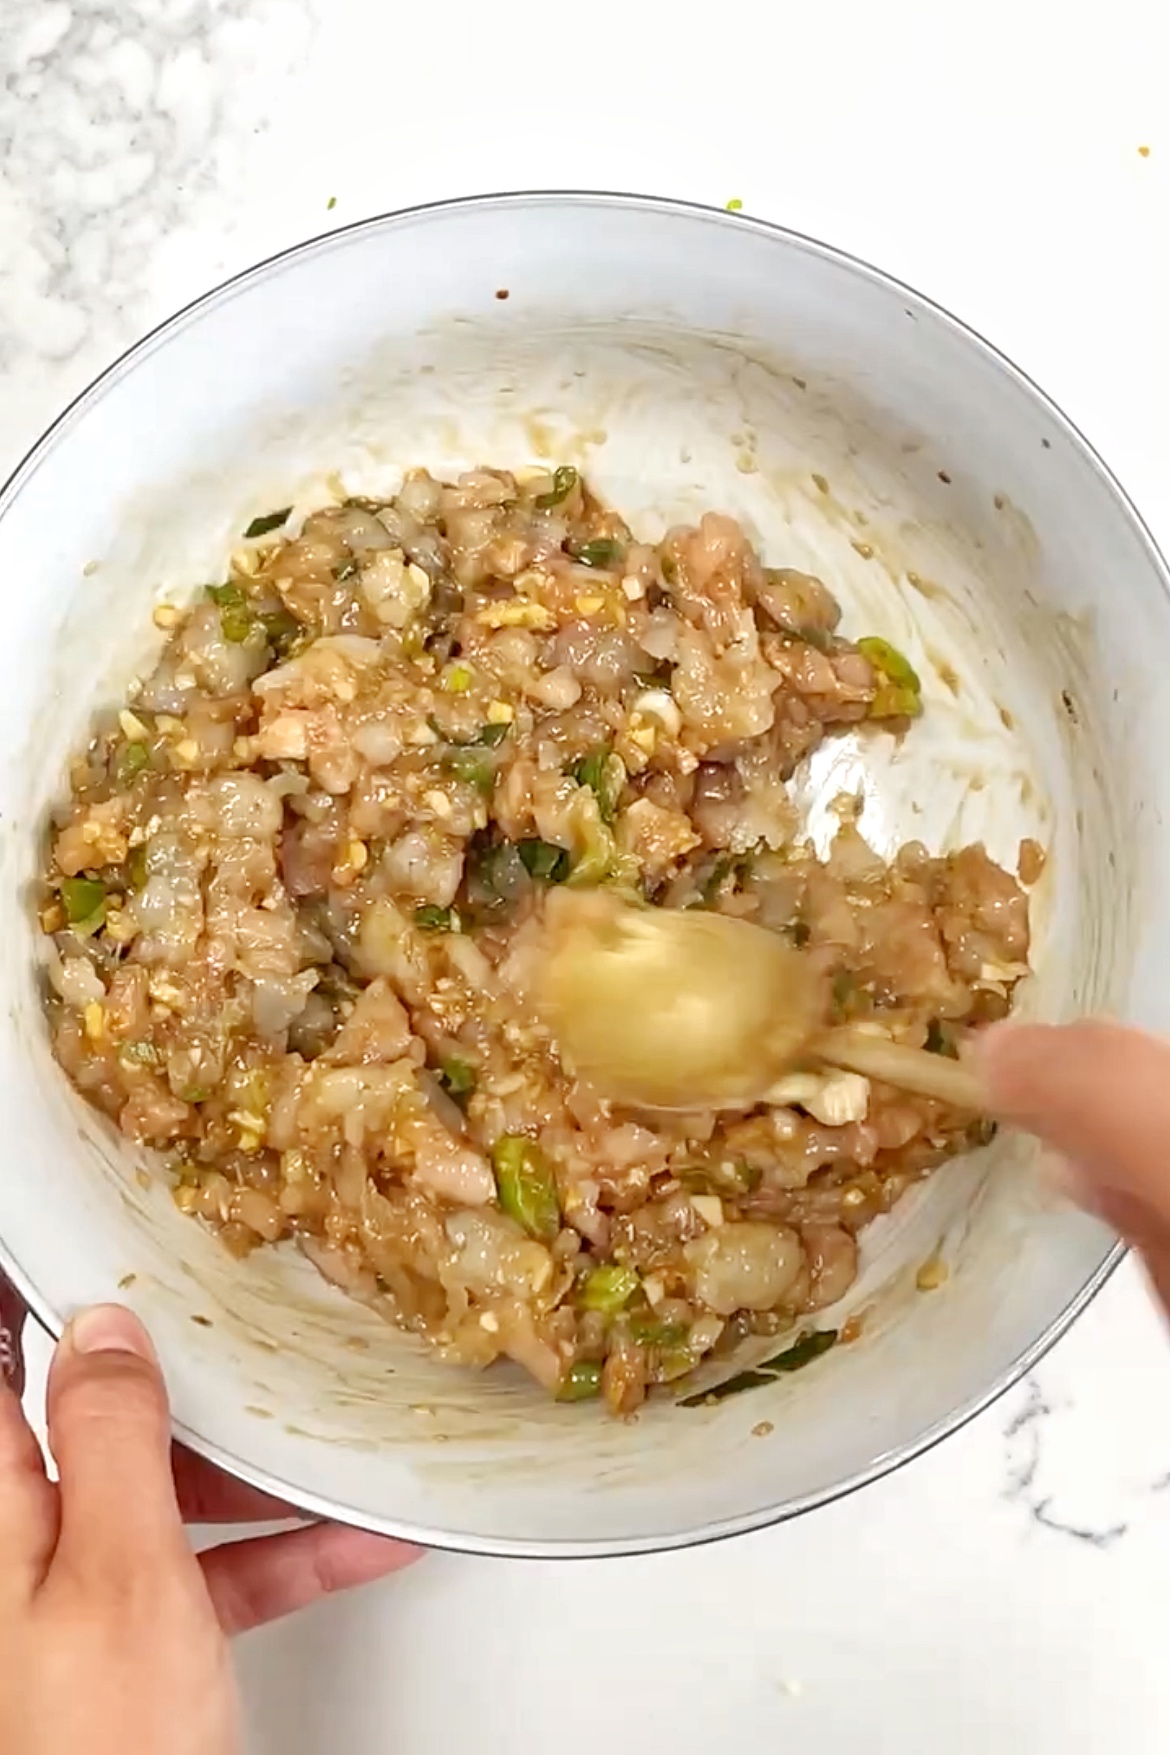 Chicken and prawn filling for dumplings